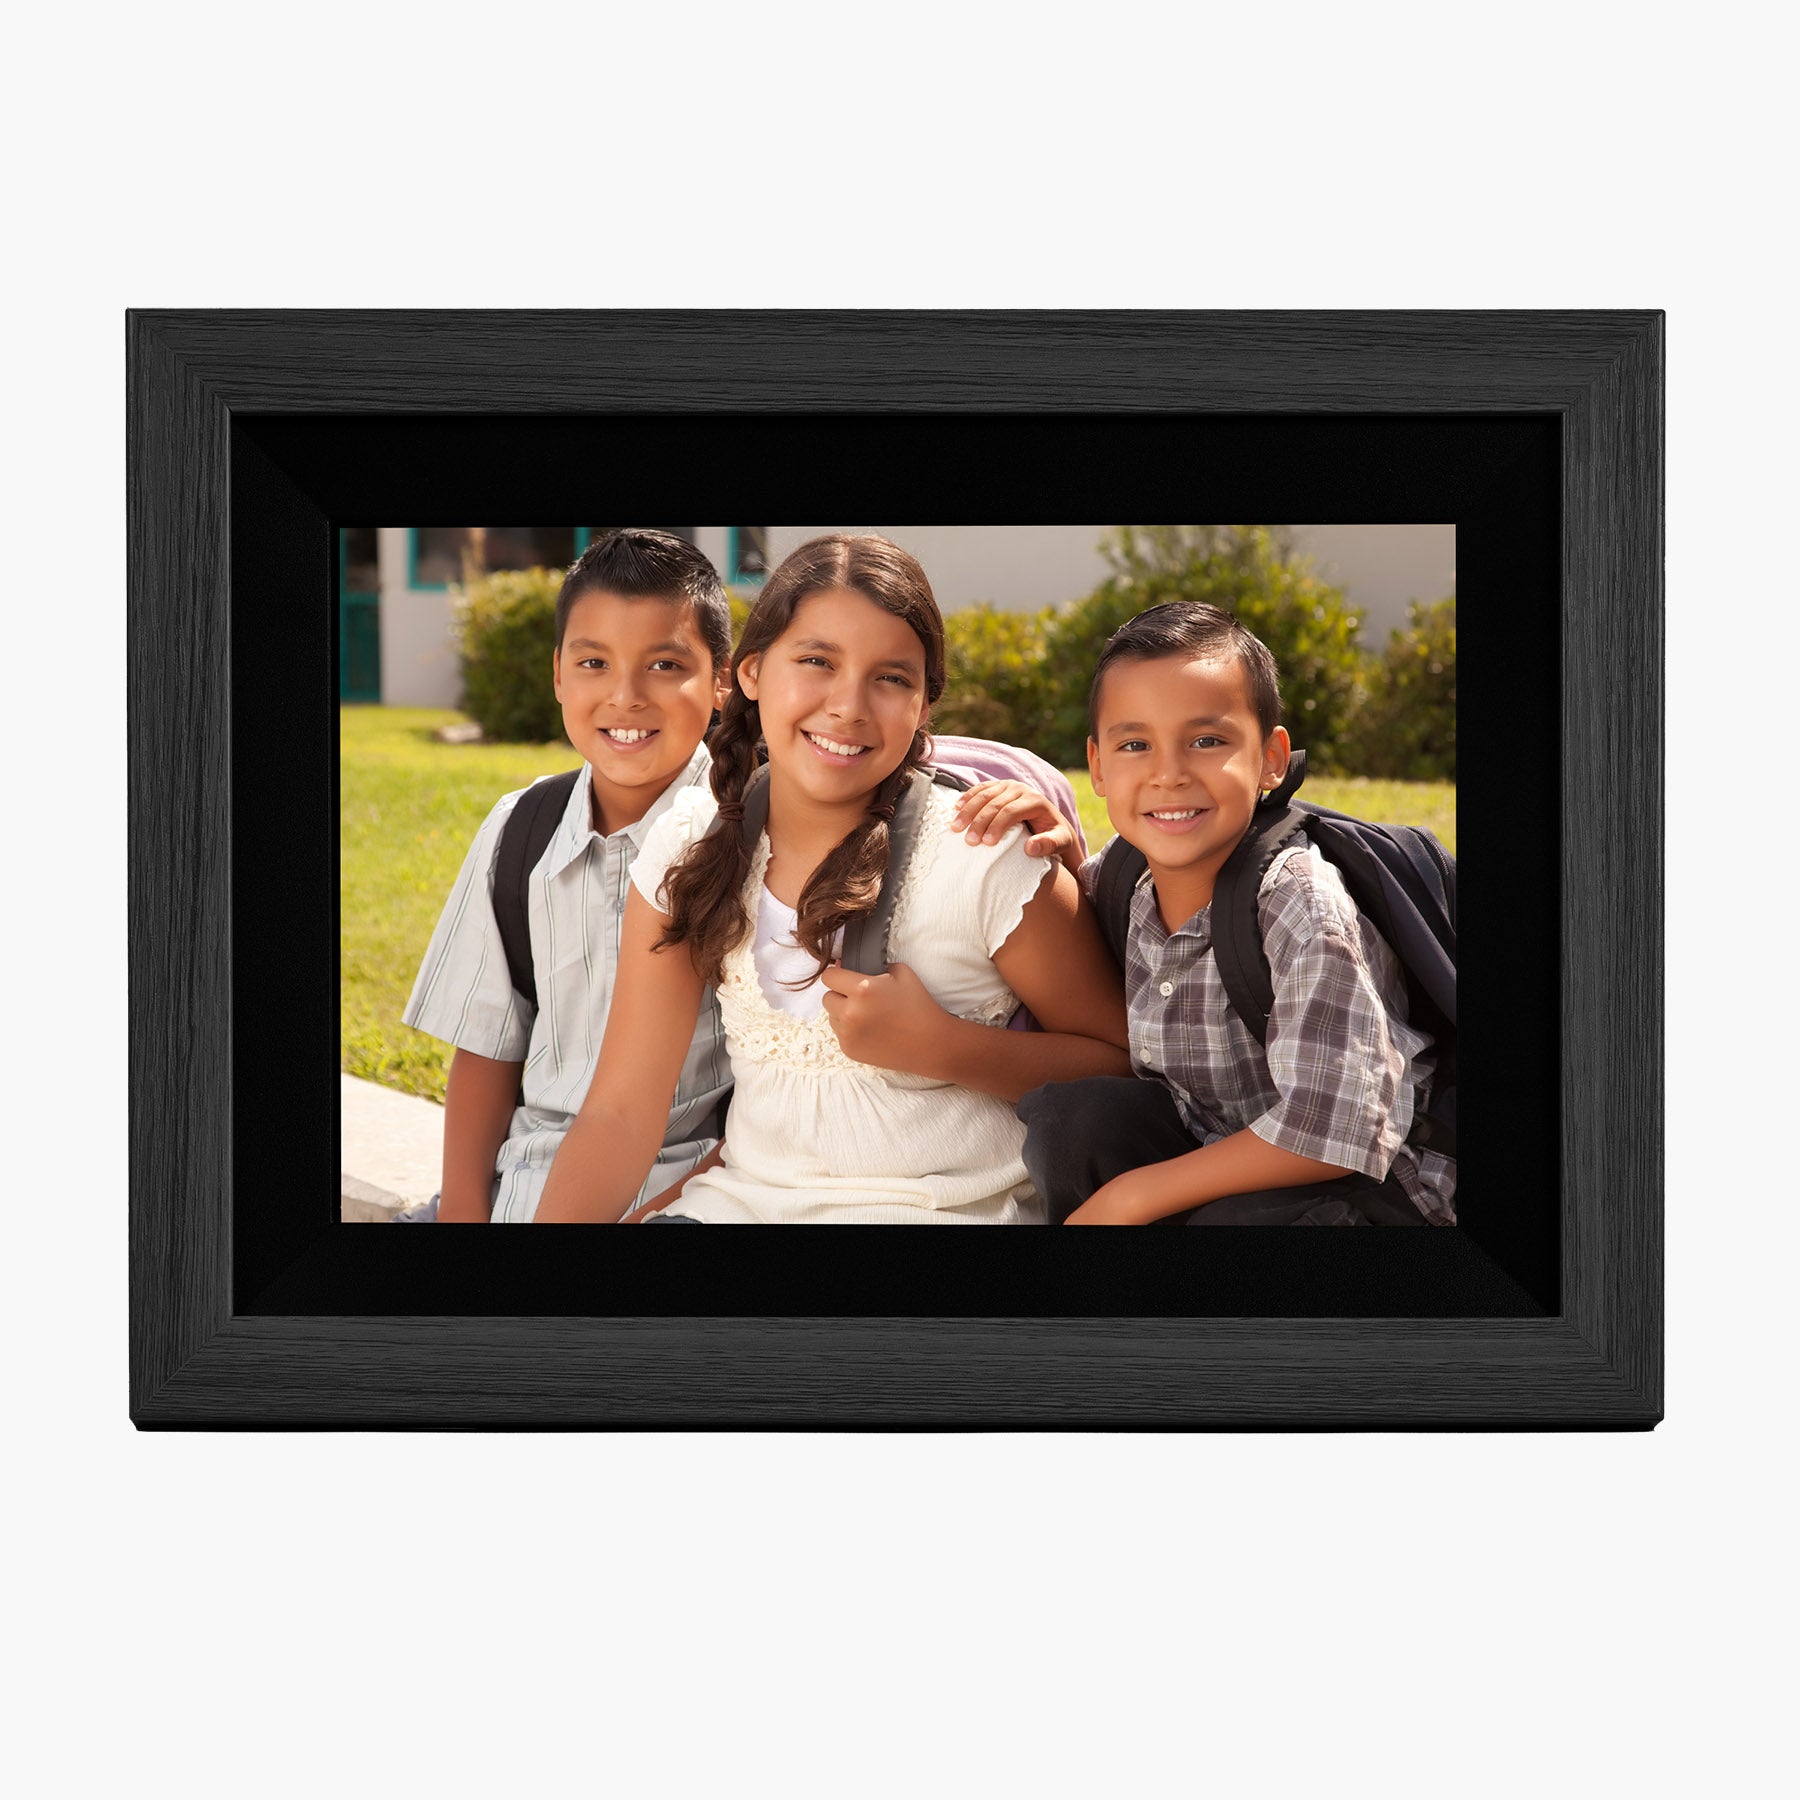 Digital Picture Frame with Wifi and 32G Memory, Compatible with Frameo App – Black Wood (iPF1032BW)